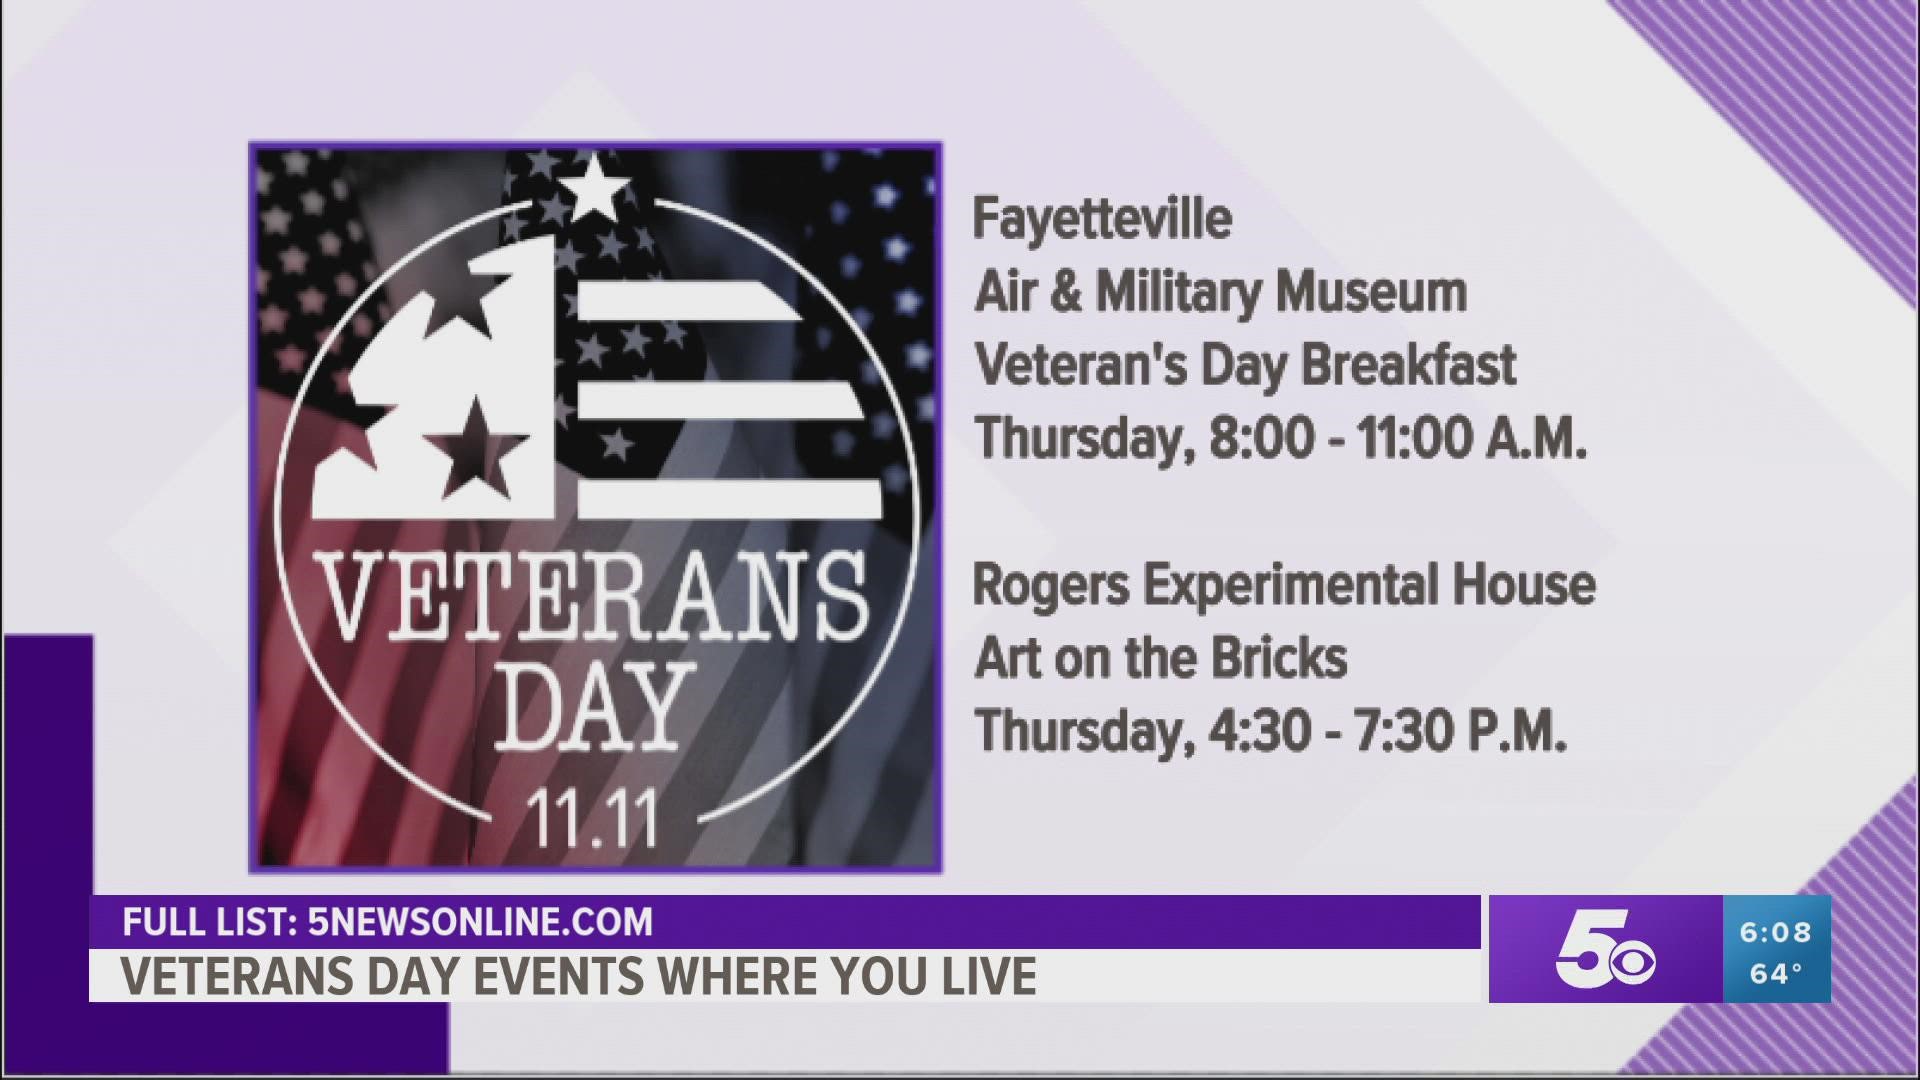 There are several events happening in Northwest Arkansas and the River Valley to help honor those who have served in the U.S. military.